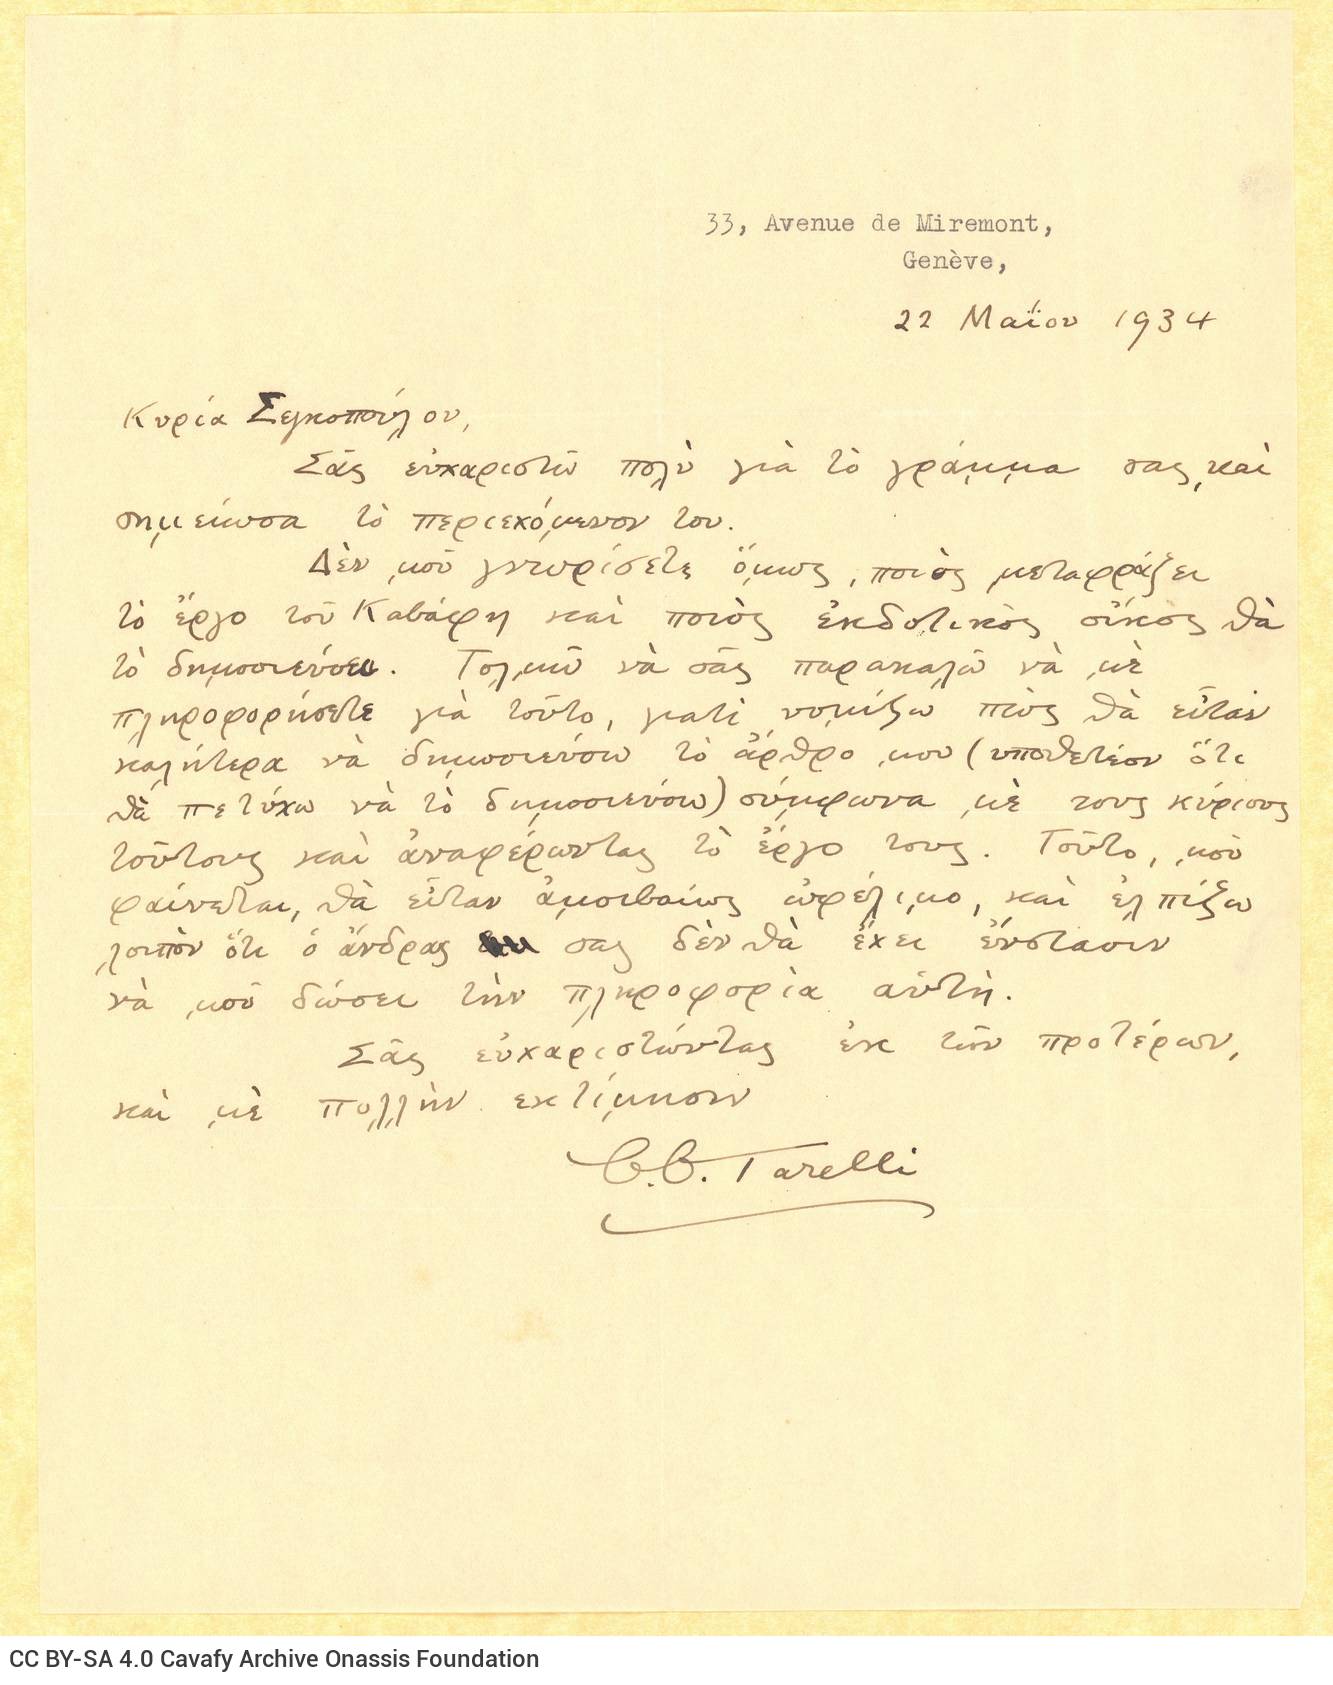 Handwritten letter by C.C. Tarelli to Rica Singopoulo one one side of a sheet. The typewritten sender's address at top right.